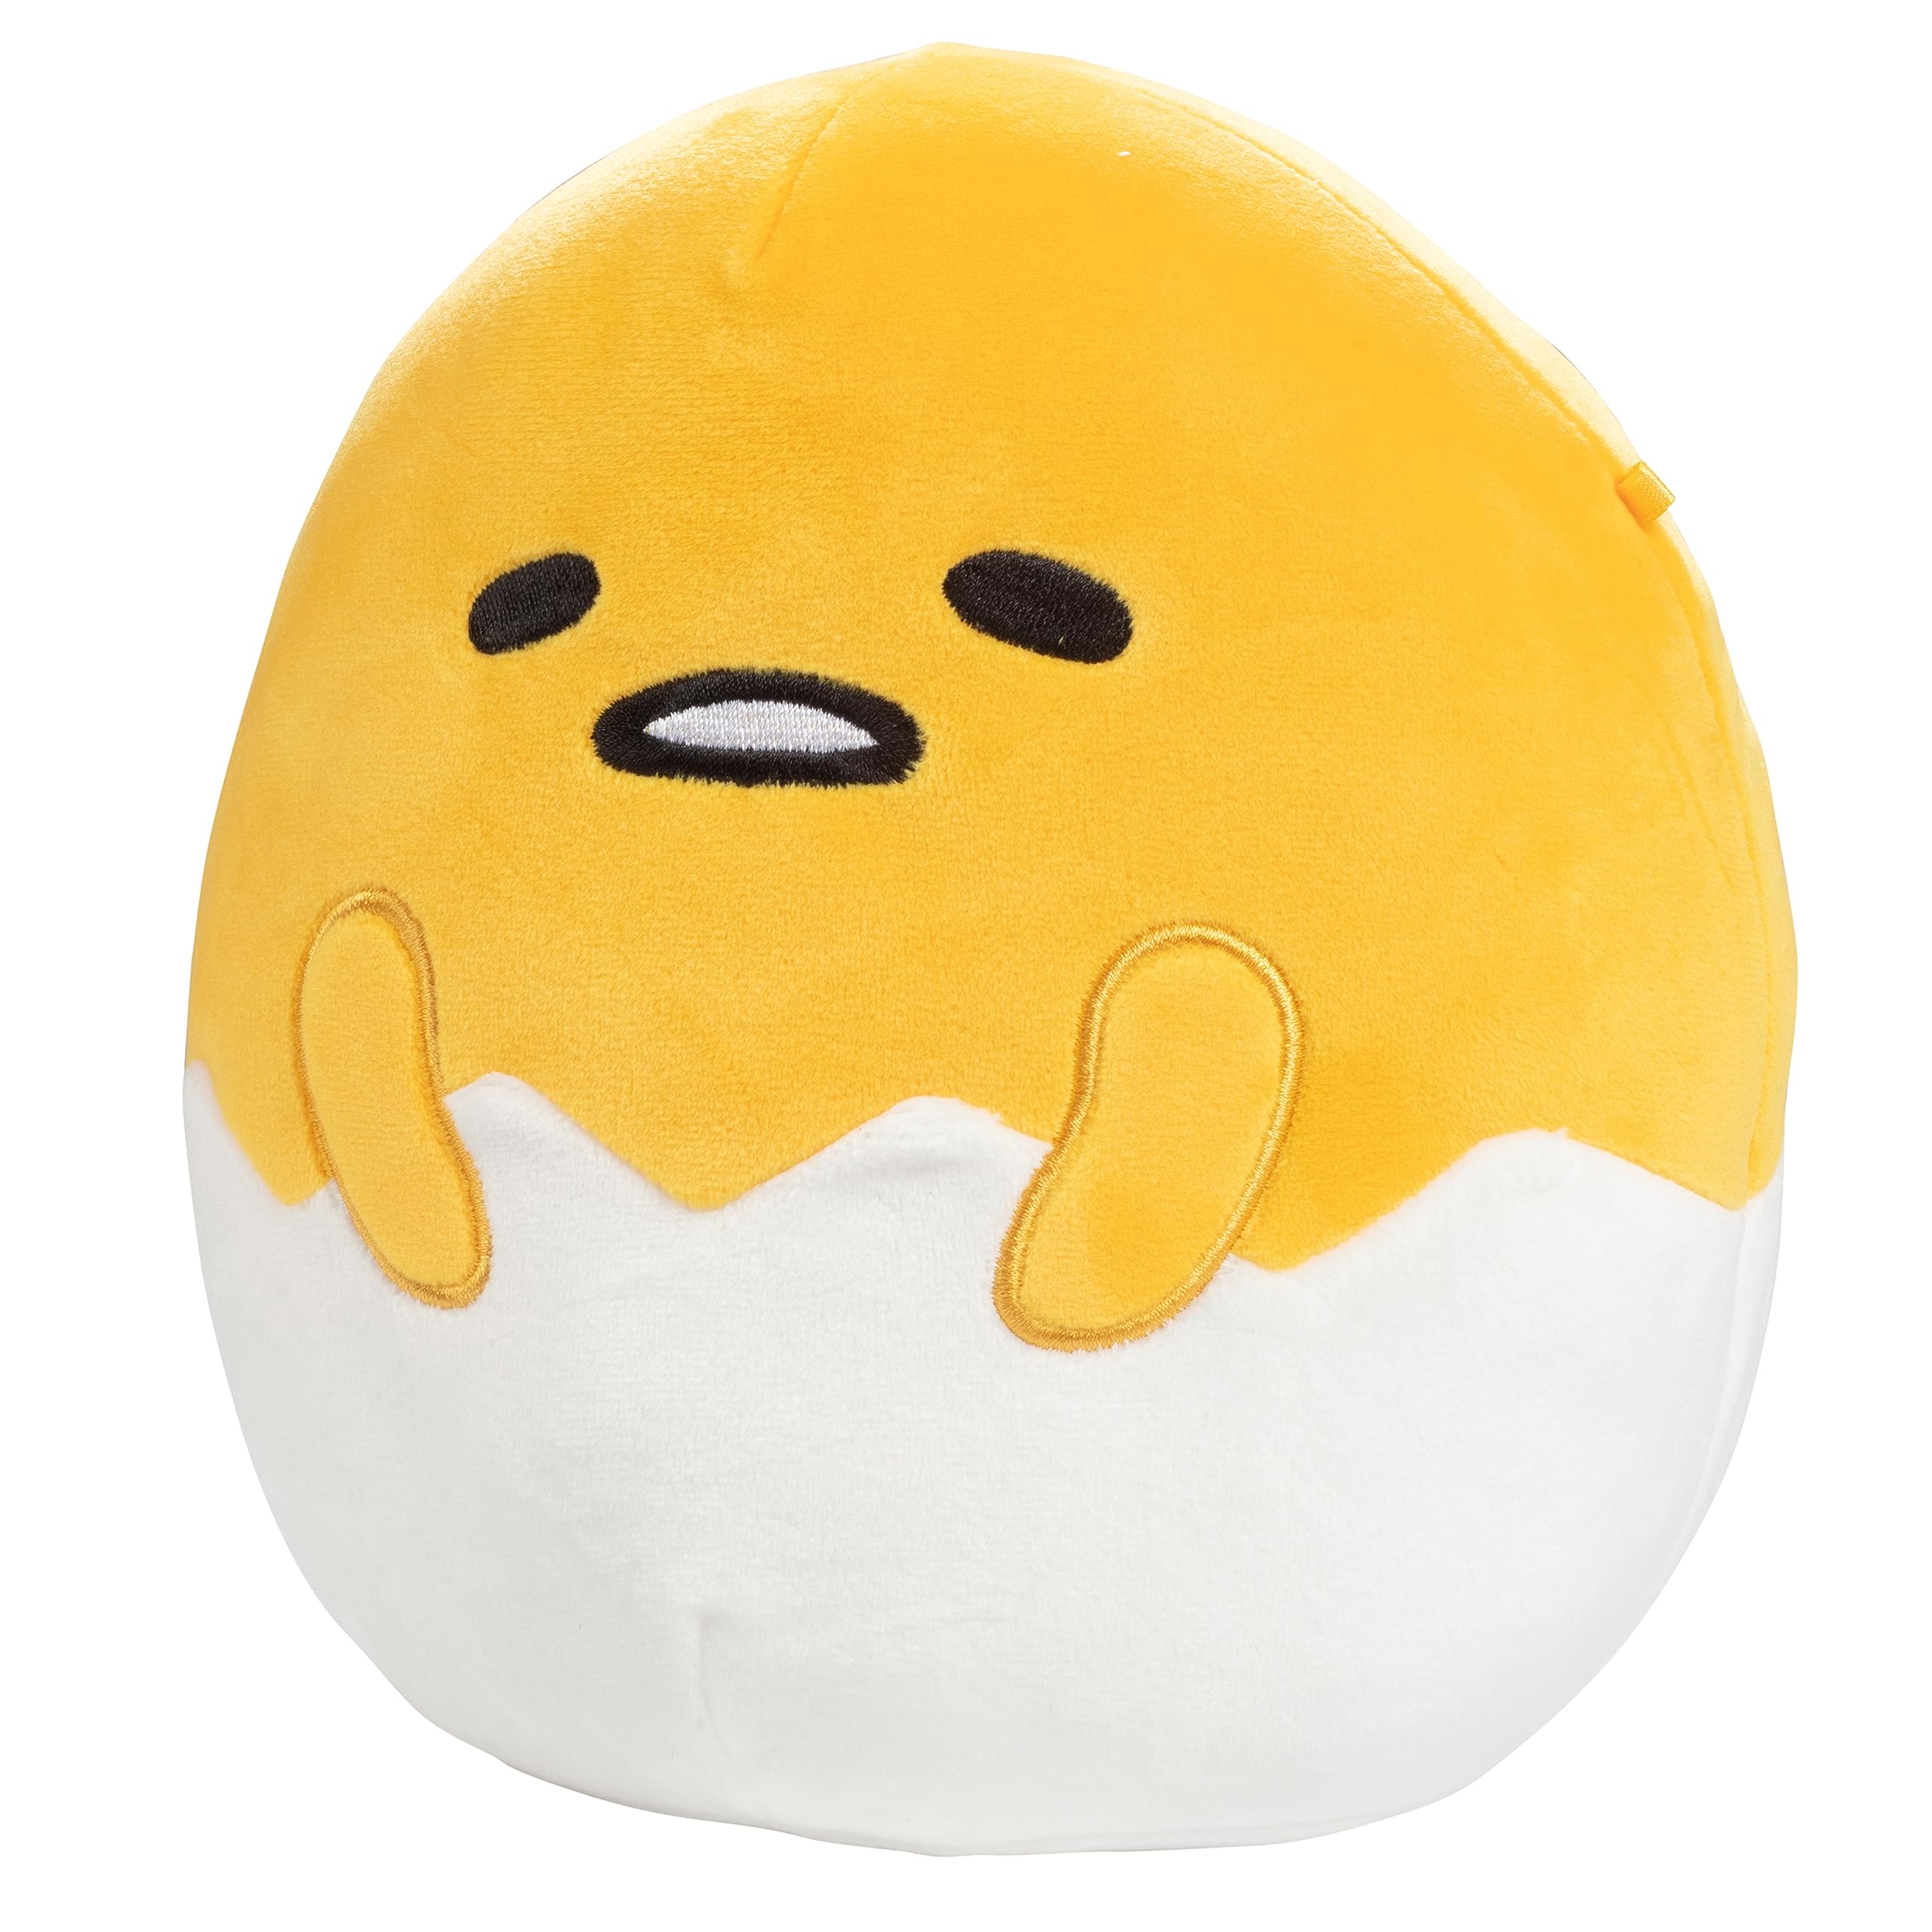 Squishmallows Original 8-Inch Gudetama Egg - Official Jazwares Plush - Collectible Soft & Squishy Stuffed Animal Toy - Add to Your Squad - Gift for Kids, Girls & Boys